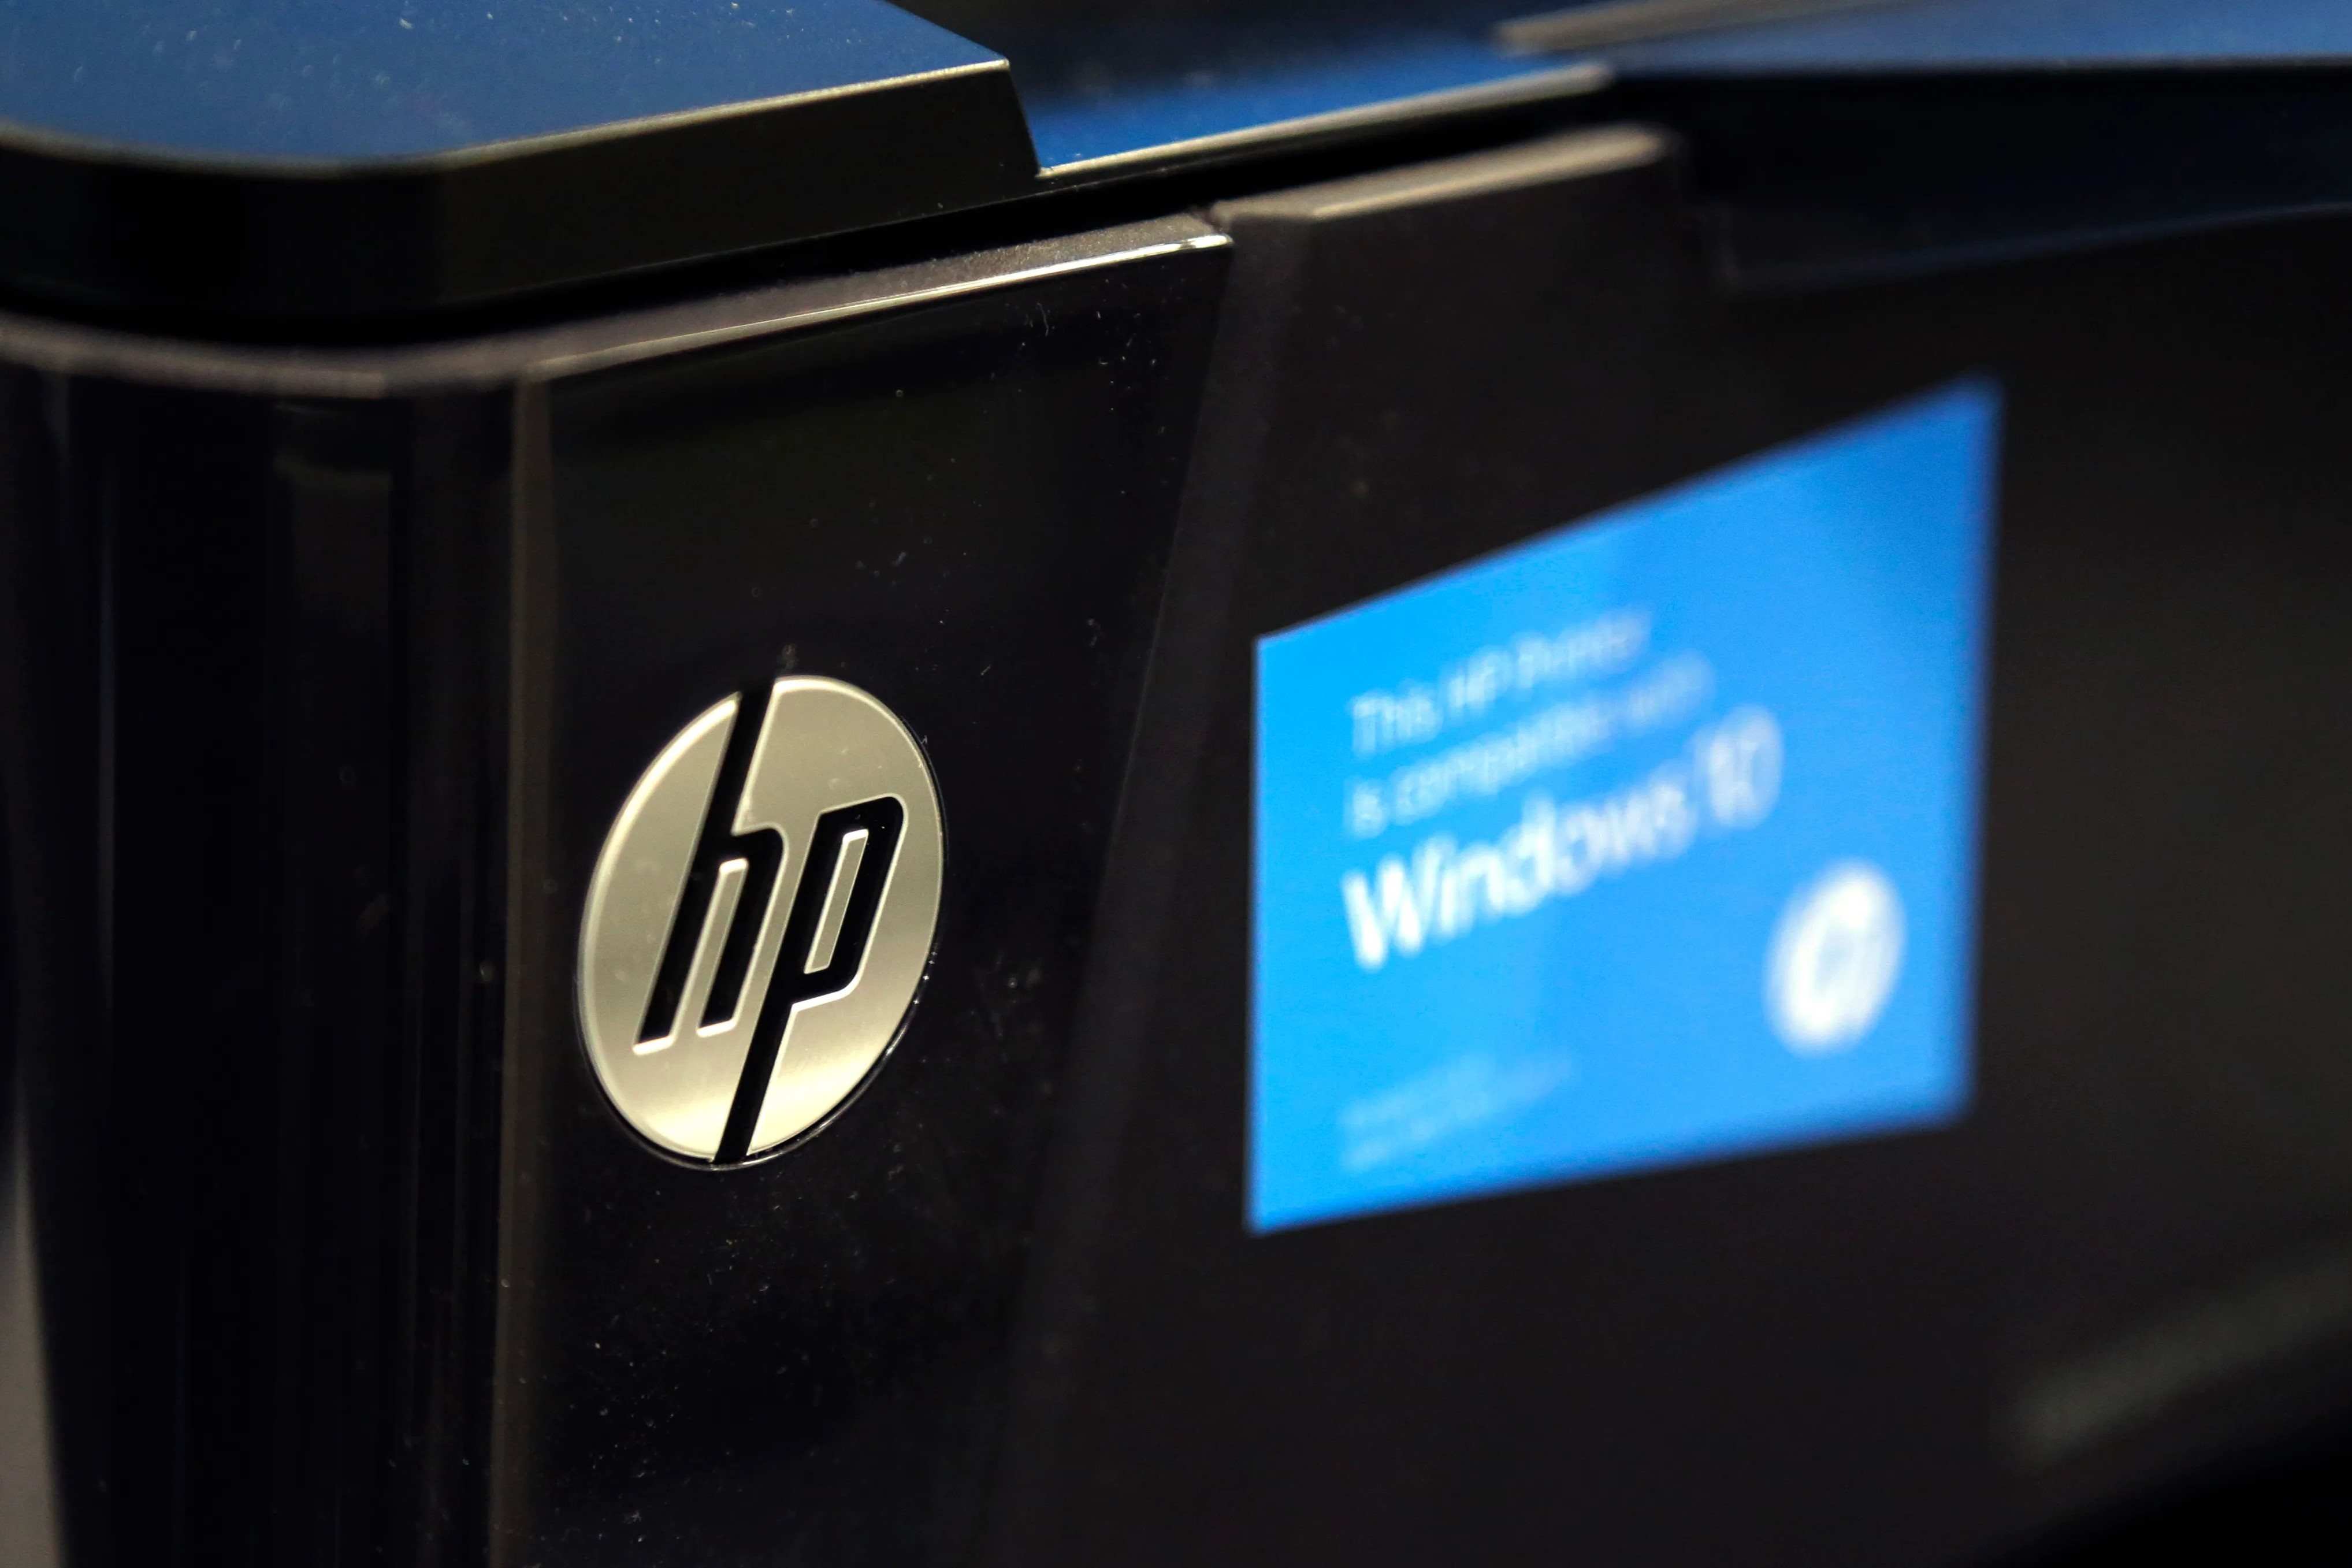 printer-troubleshooting-resolving-a-blinking-blue-light-issue-on-an-hp-printer